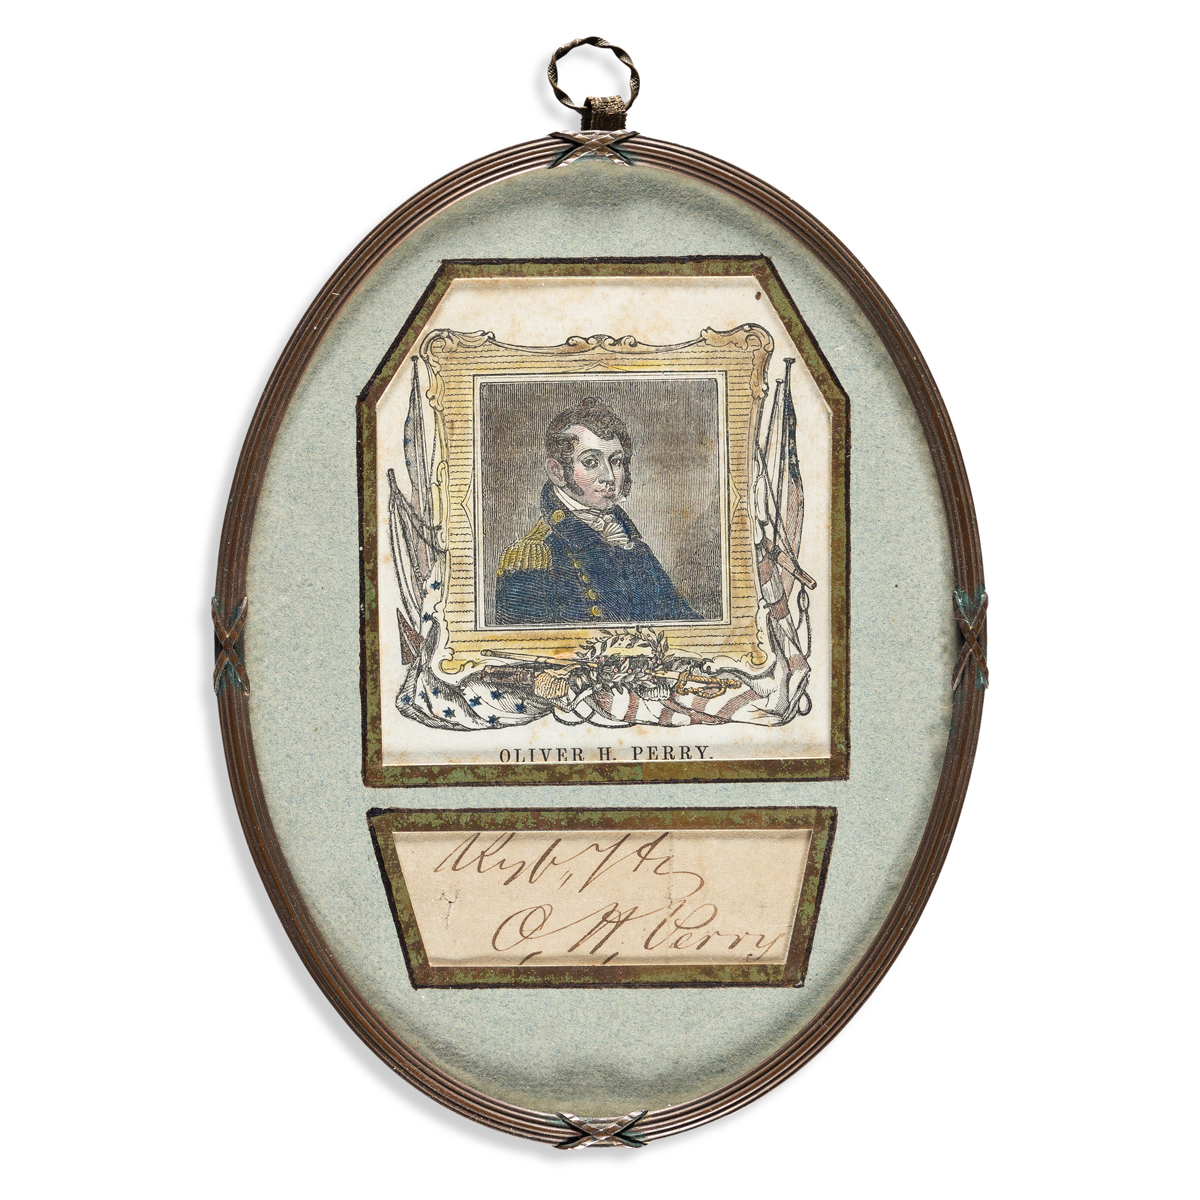 (WAR OF 1812.) Cut signatures of naval heroes Oliver Hazard Perry and James Lawrence in matching frames.